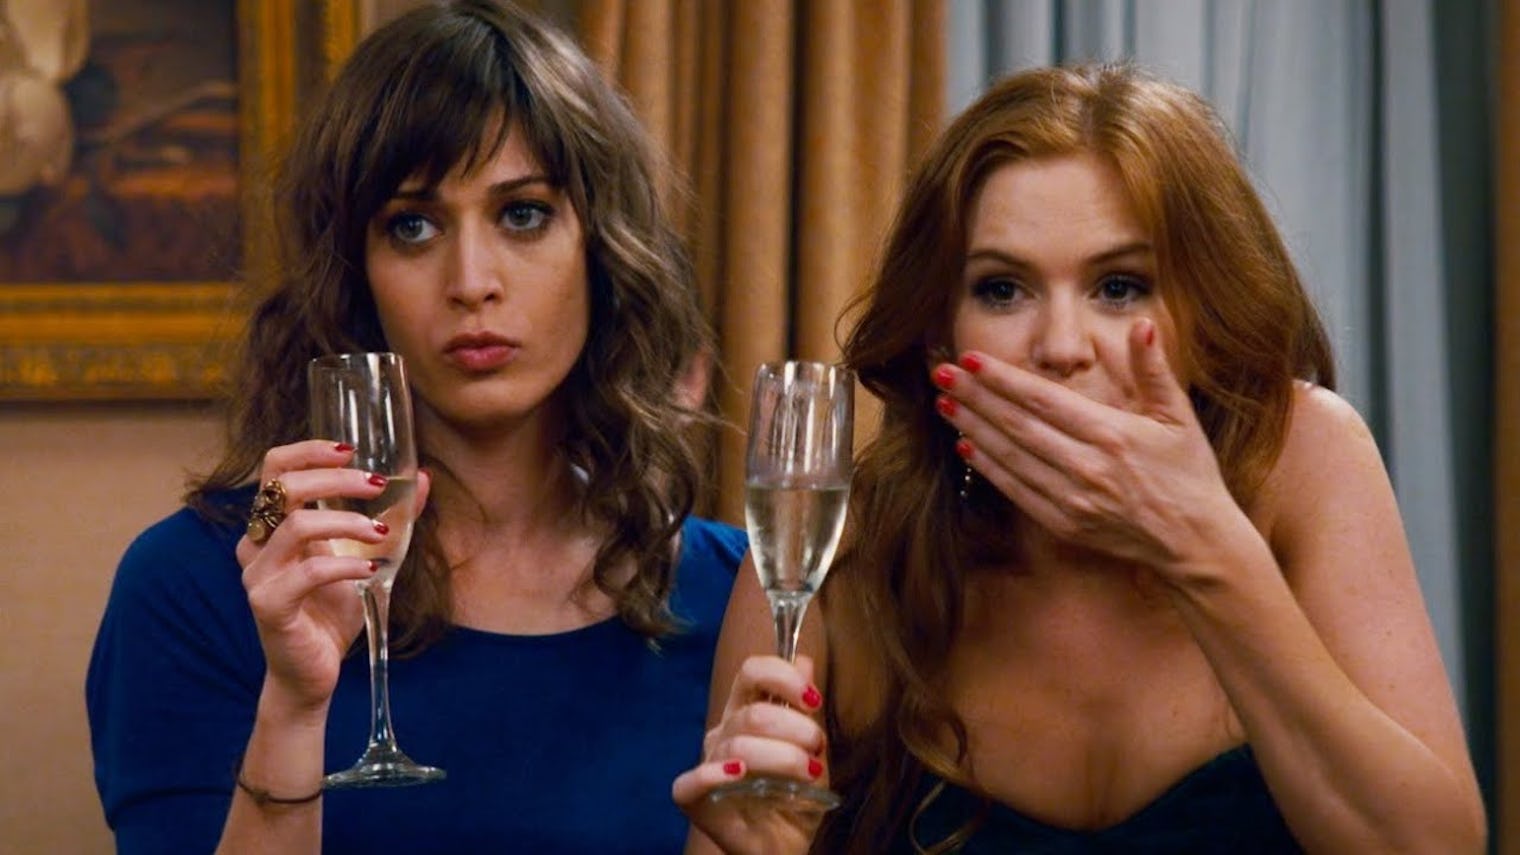 27 Sexy Comedy Movies That Will Make You Laugh & Blush